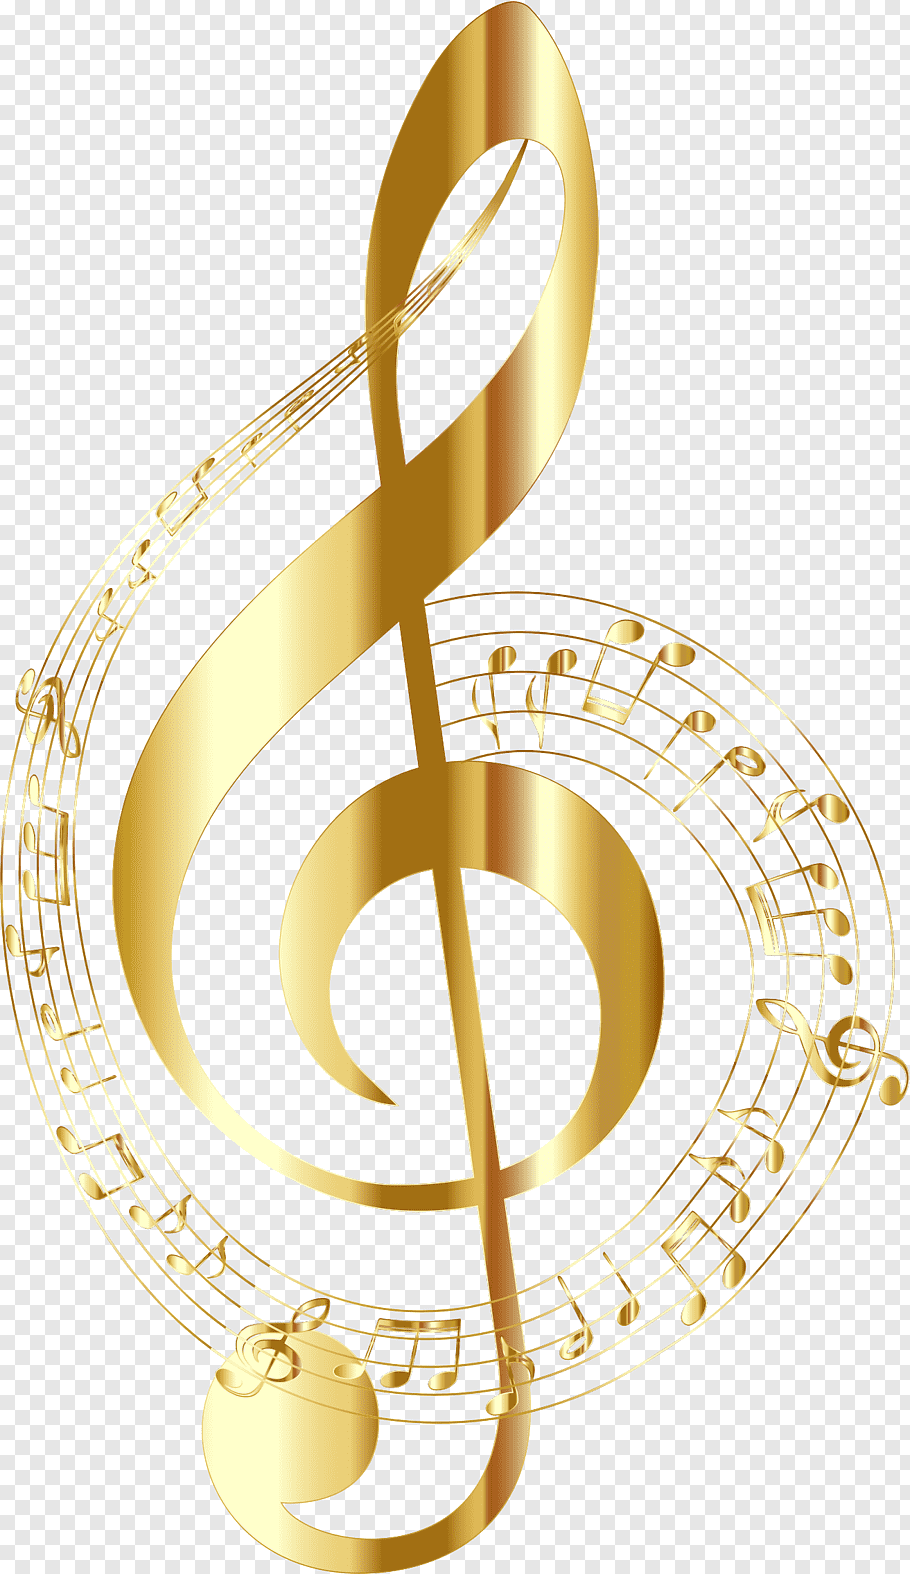 Gold g clef illustration, Musical note Staff Clef, musical.